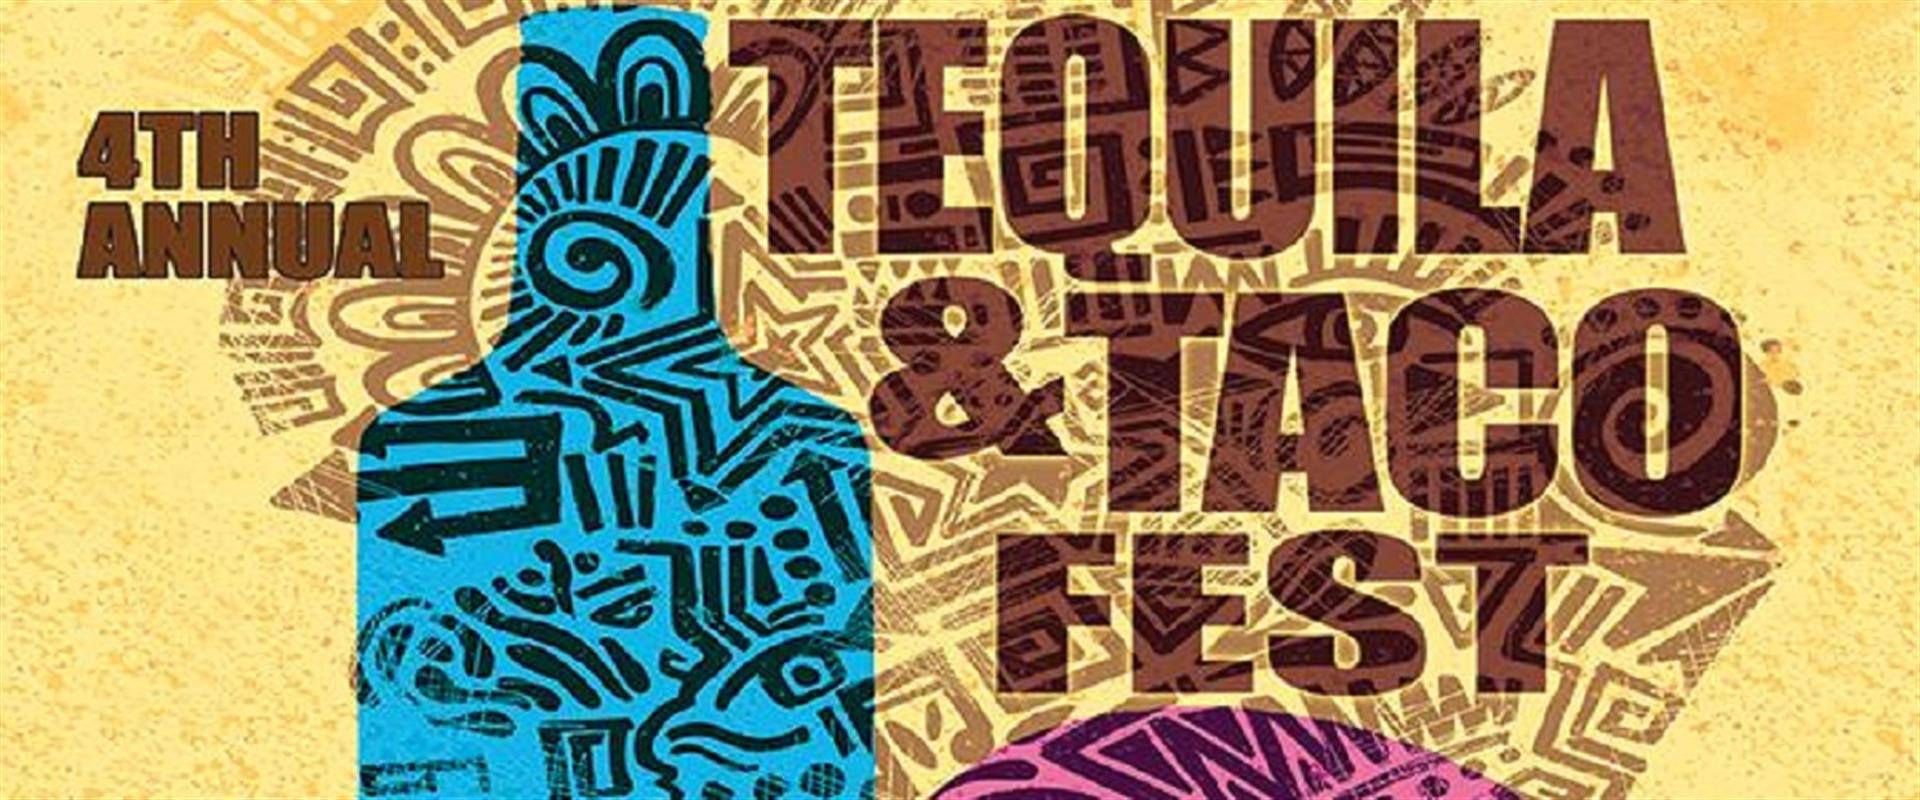 tequila and taco fest